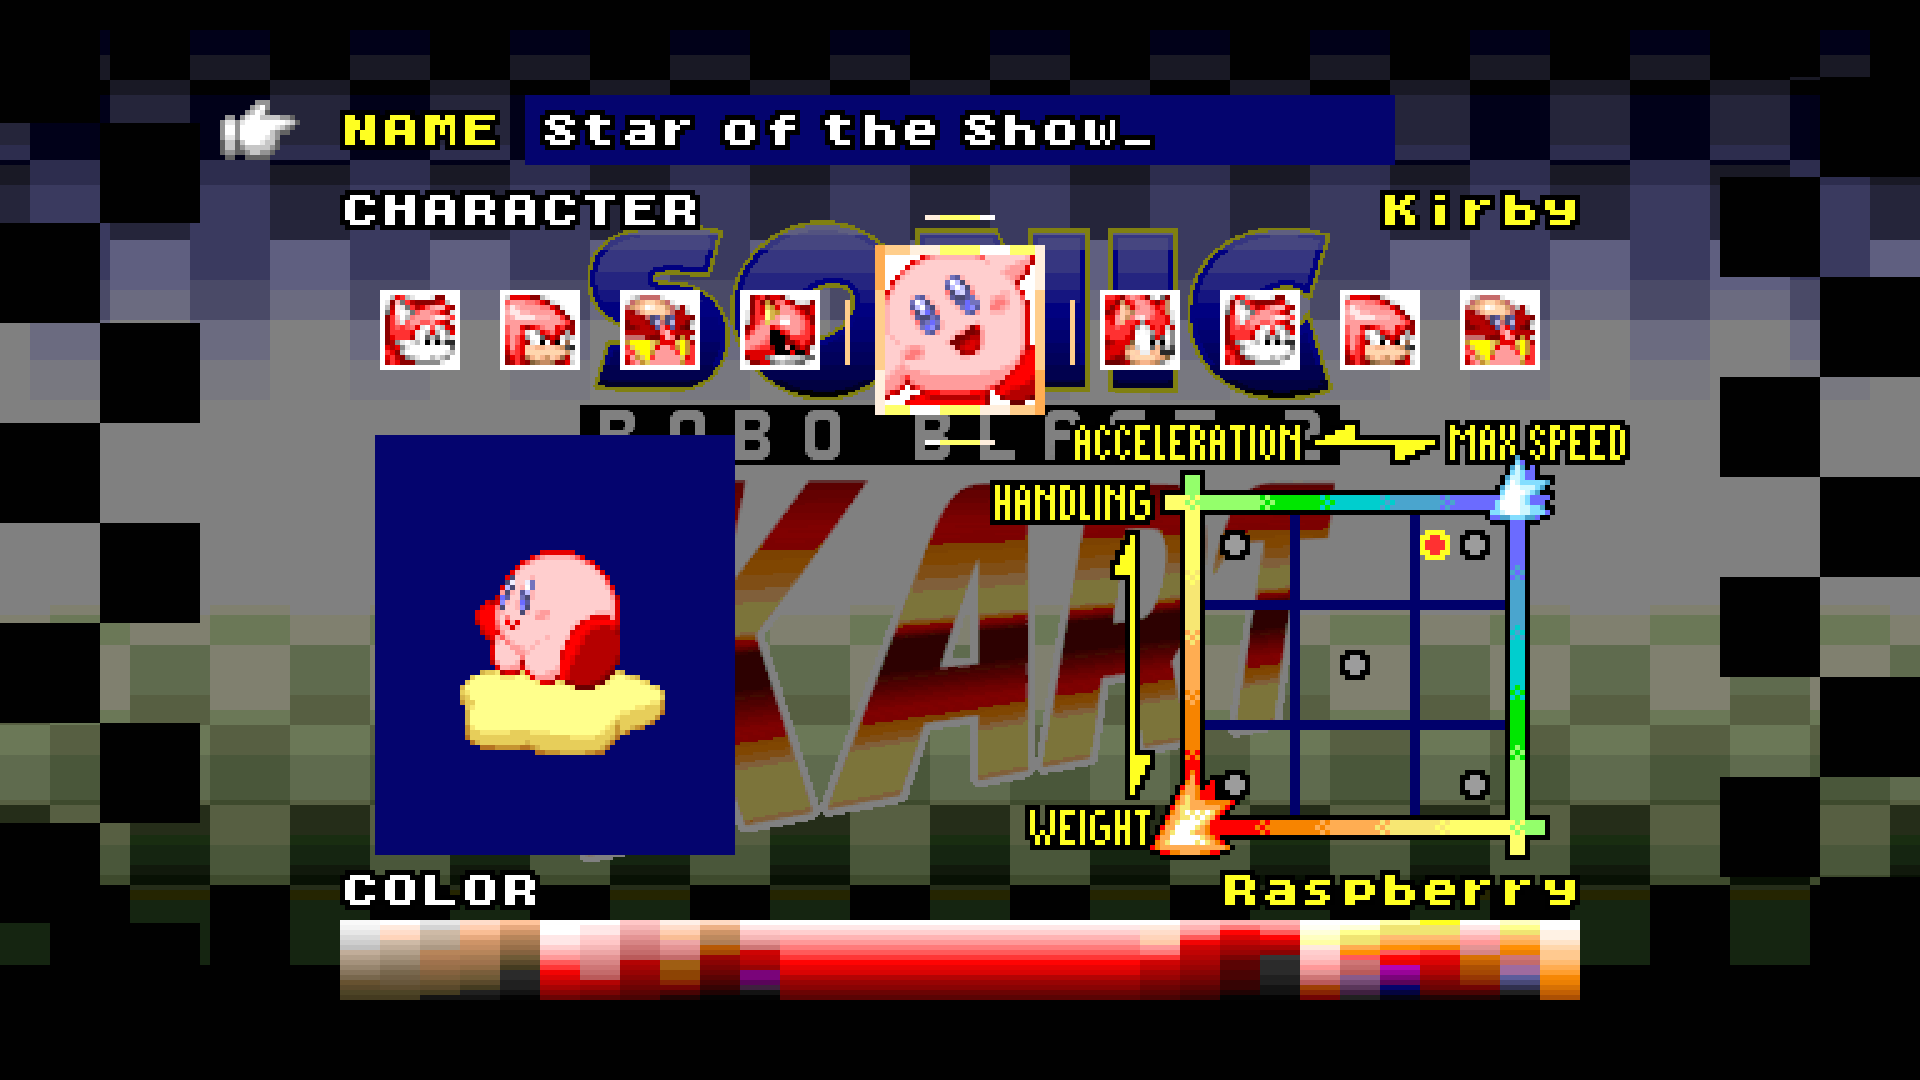 KirbyCharSel.png